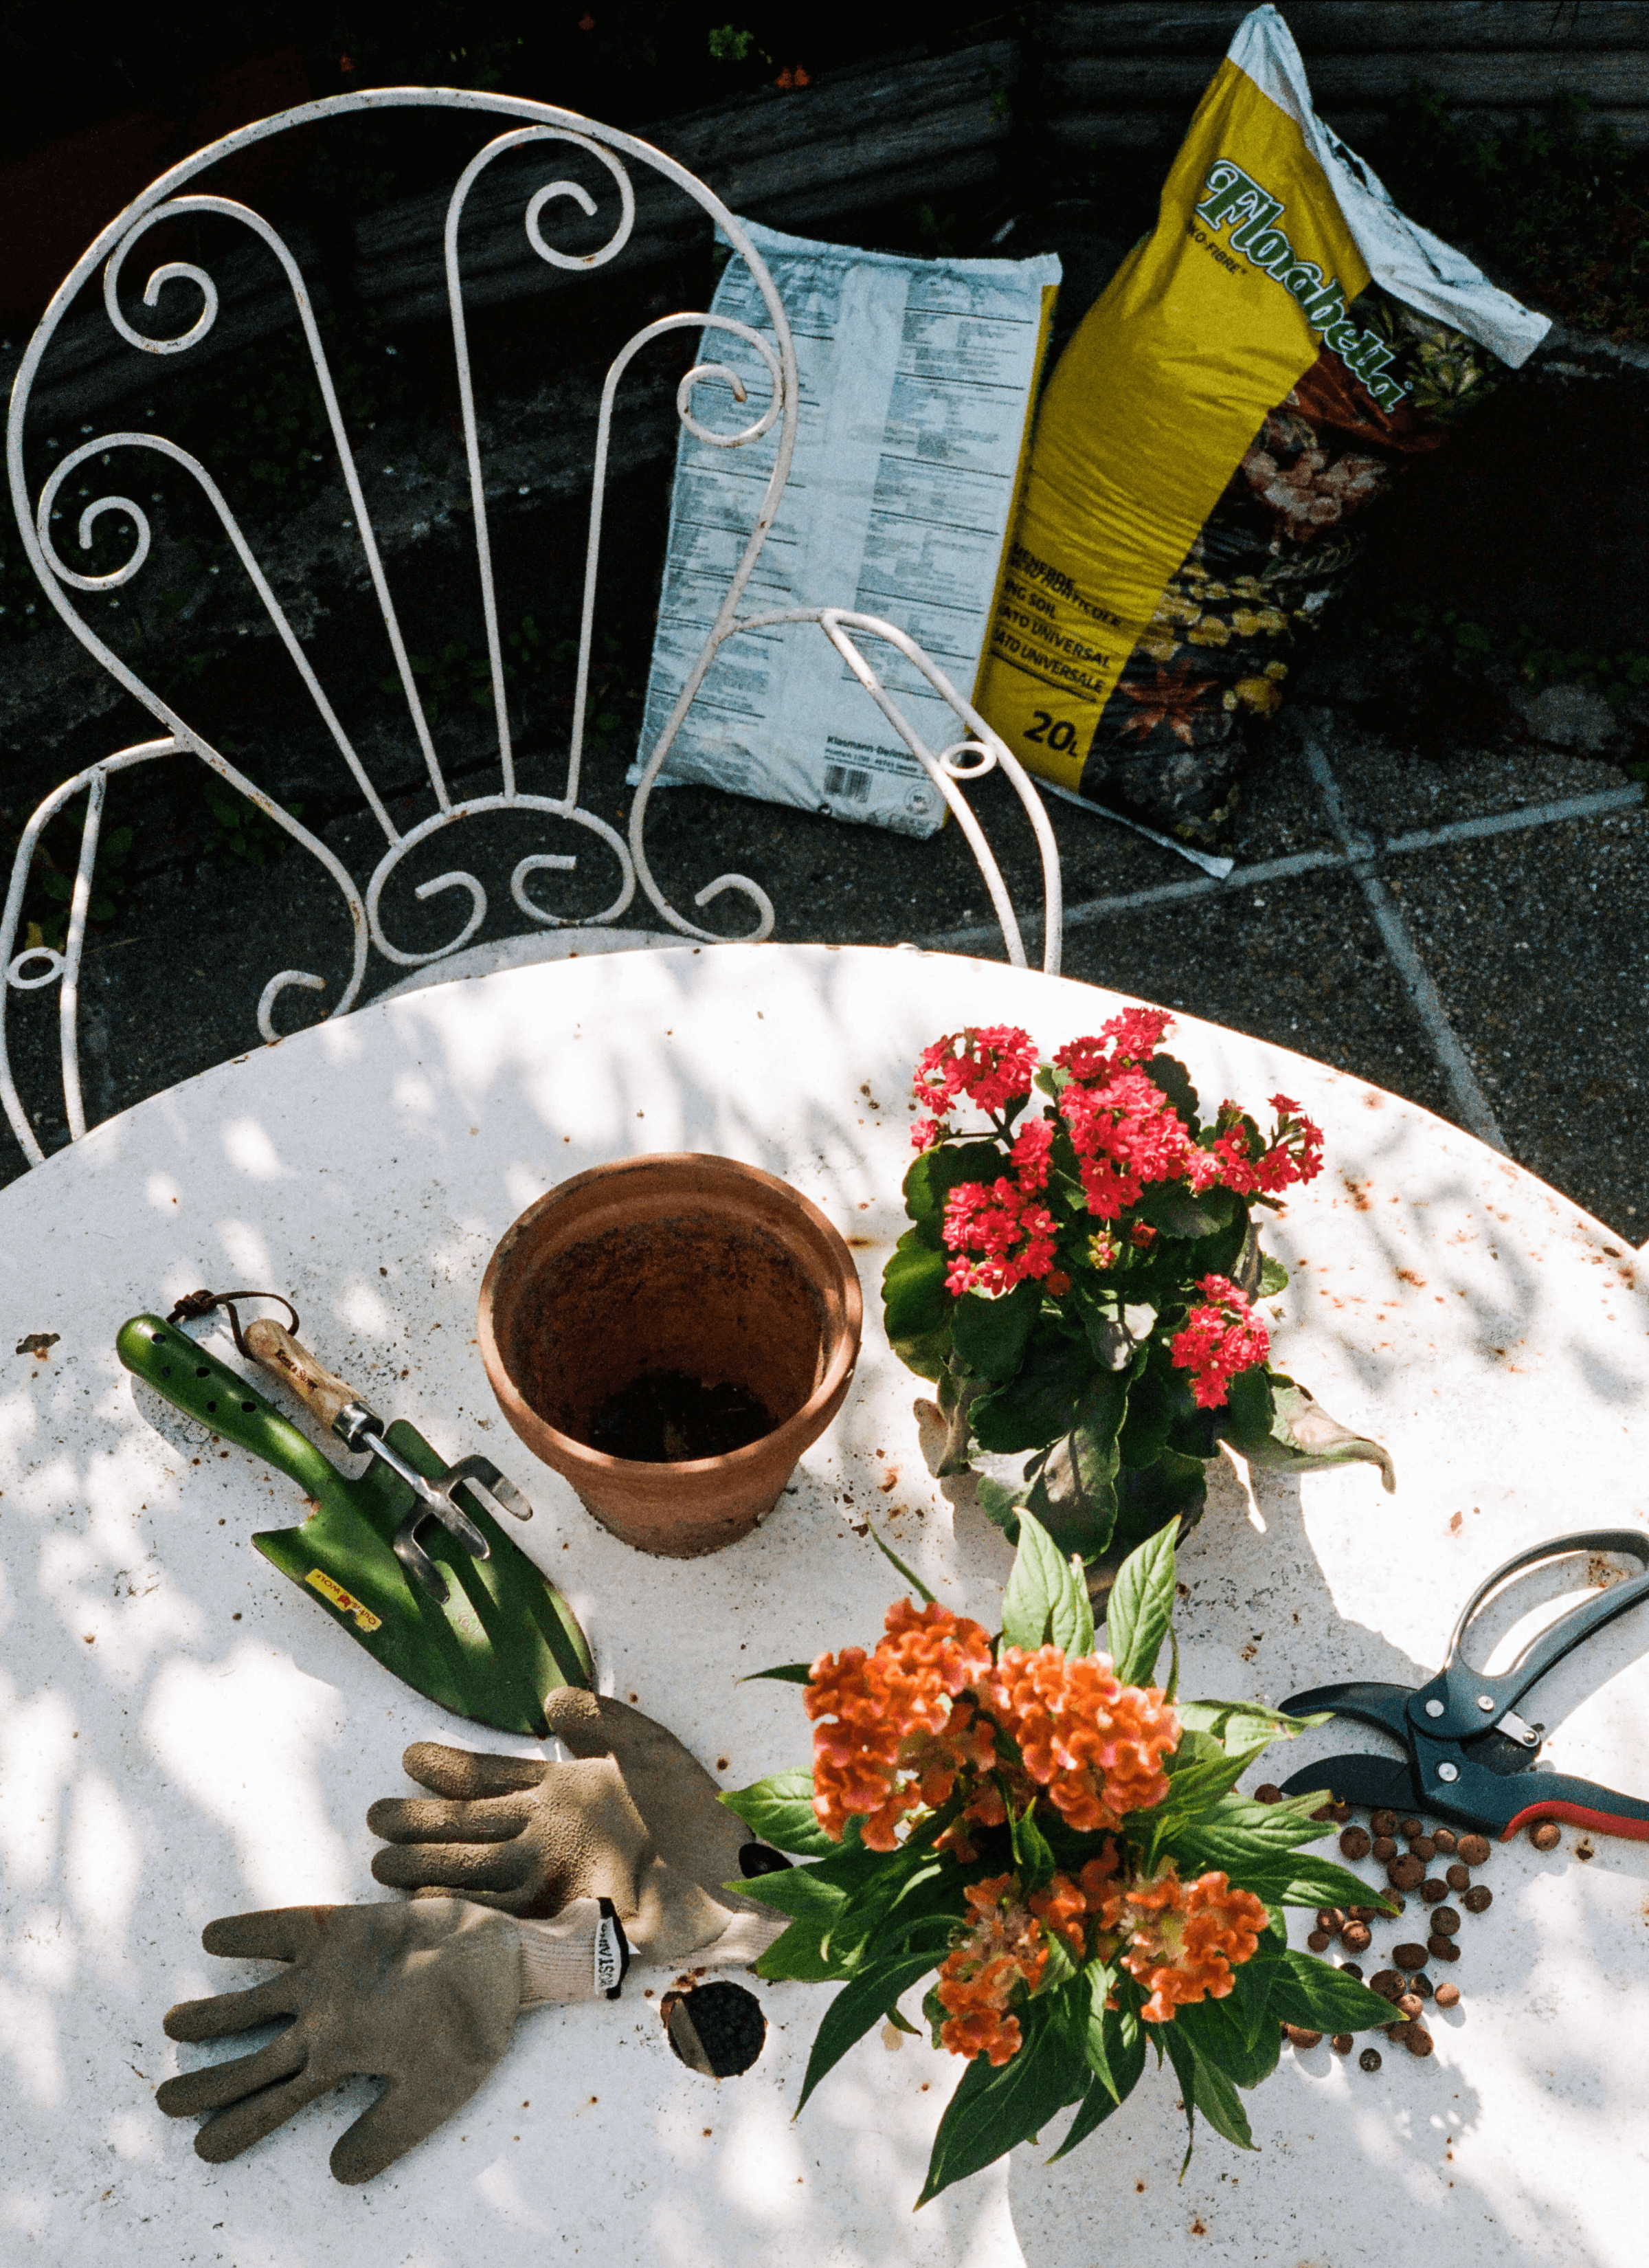 Two pots of flowers, an empty terracotta pot, gardening tools and a pair of gloves on the white table and white chair in the garden. There are two bags of soil for plants on the floor.